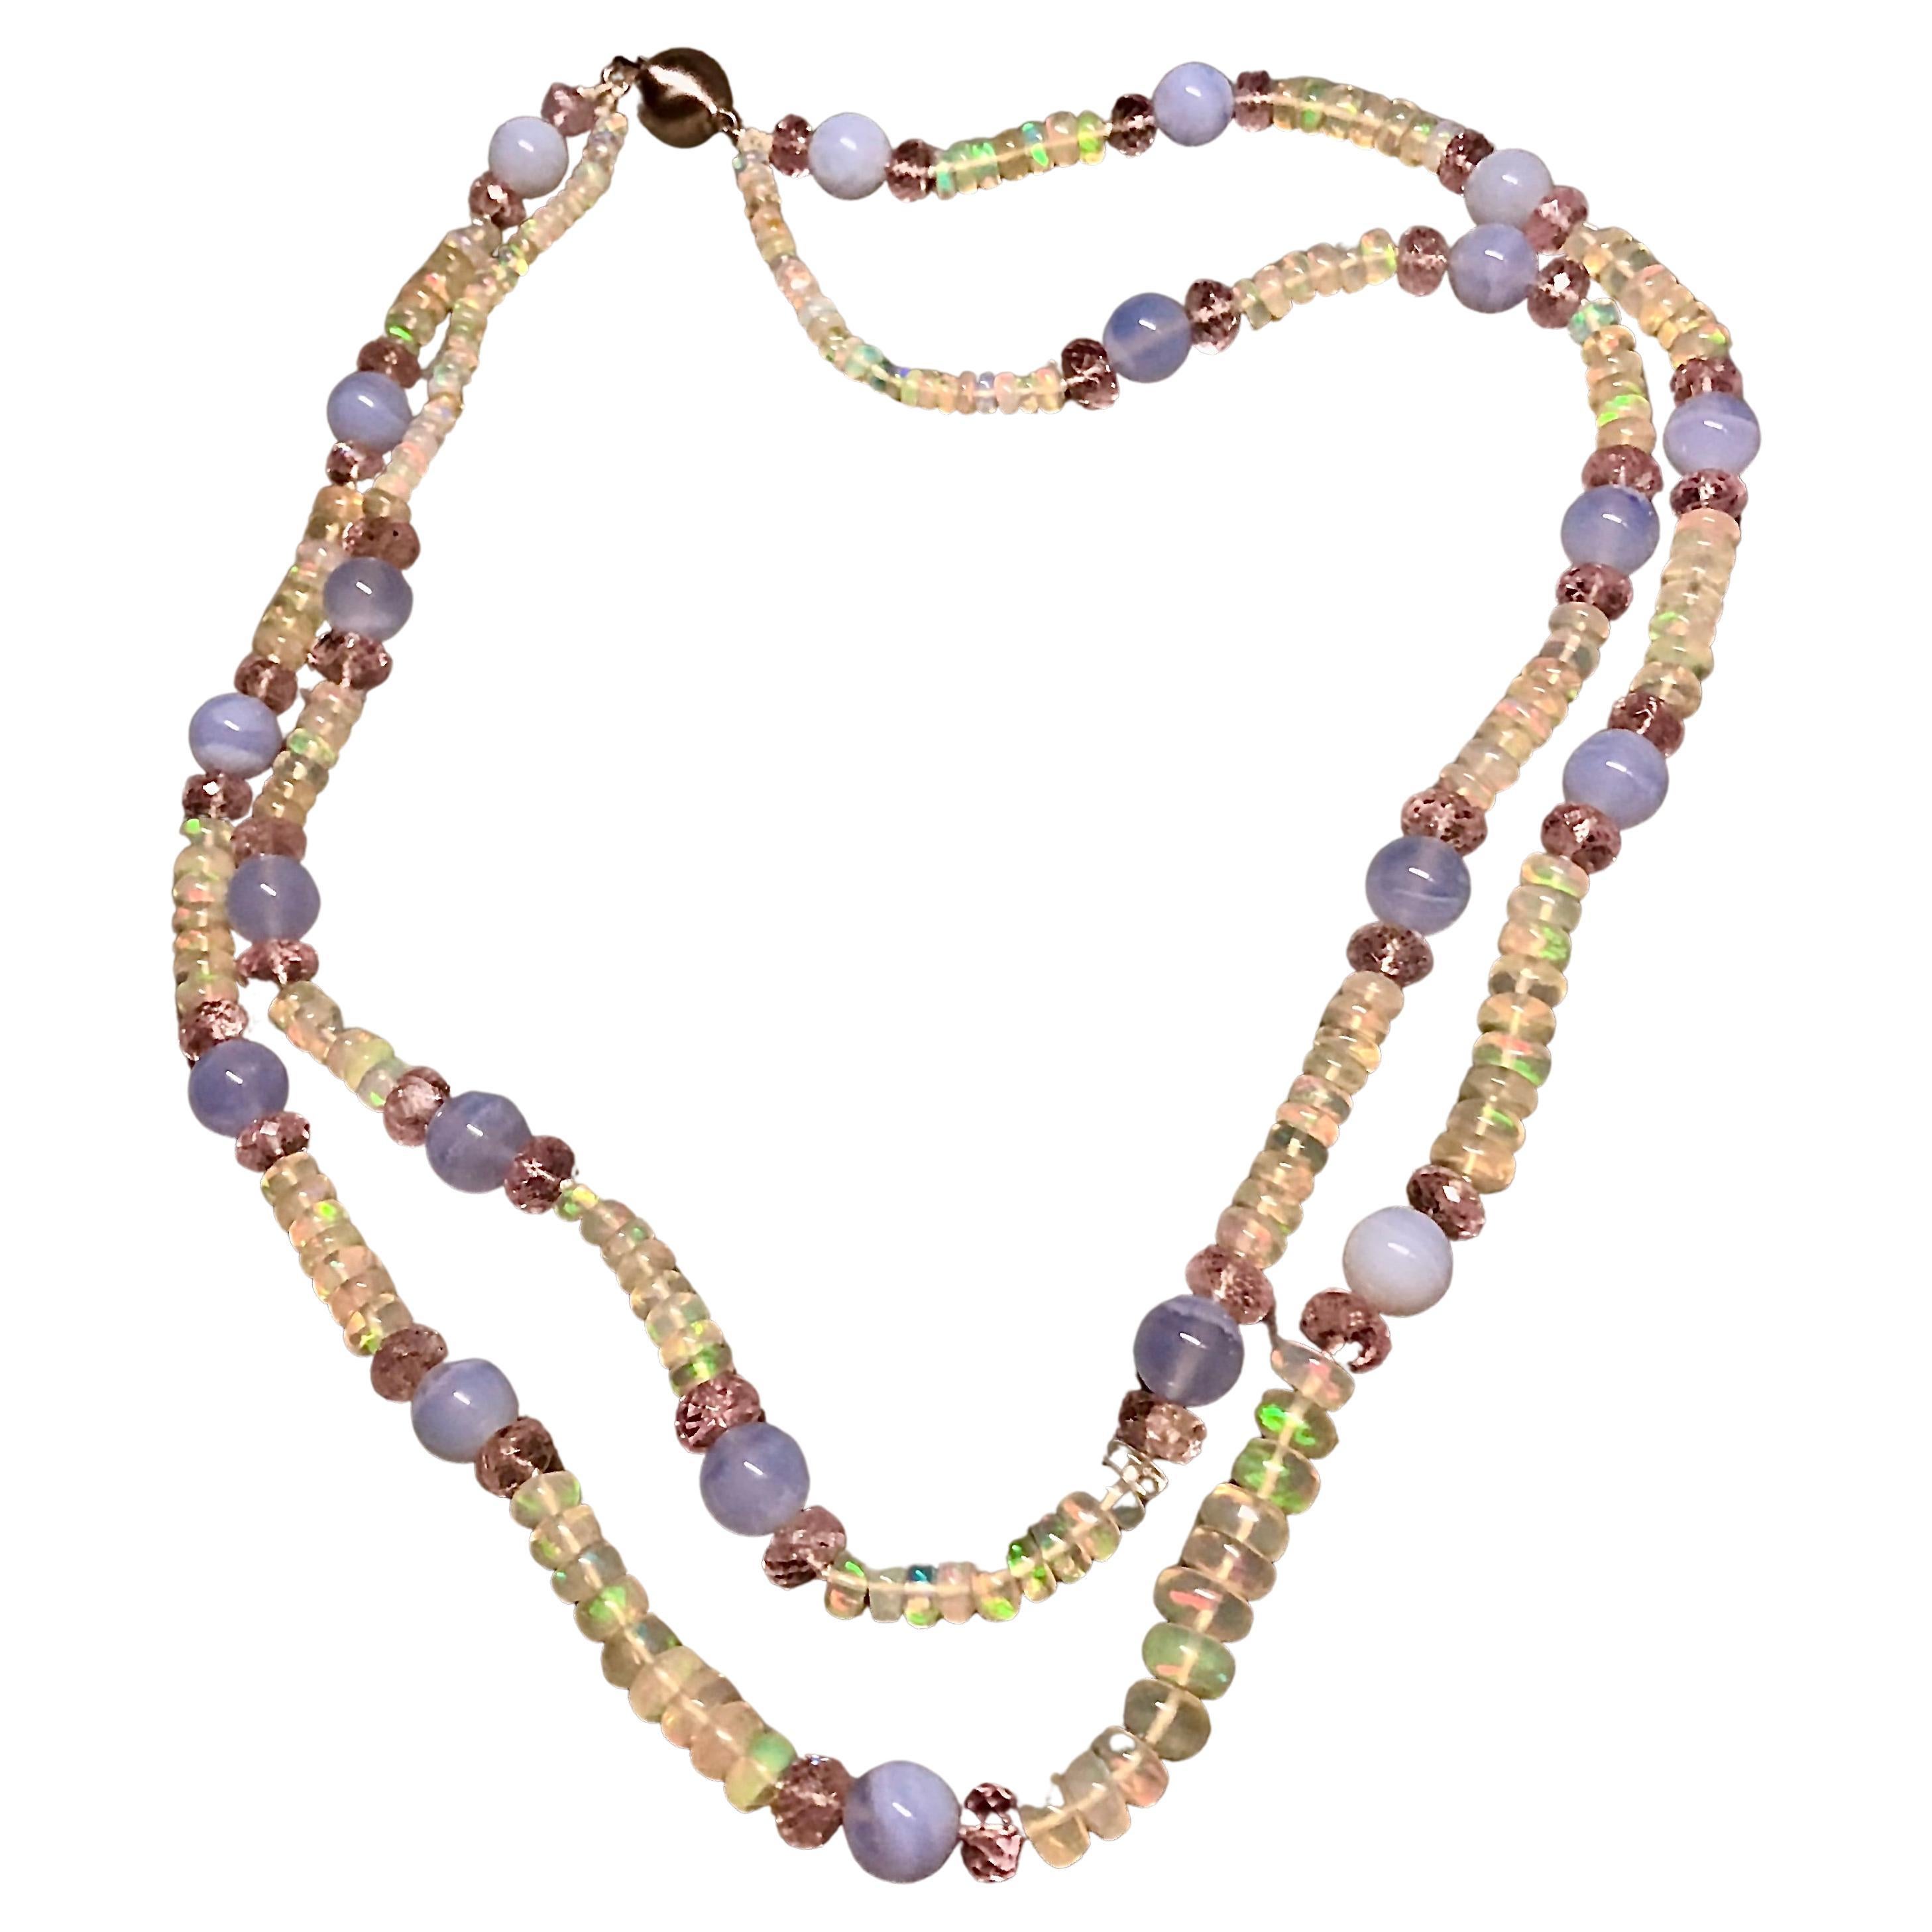 Opal, chalcedony and morganite necklace